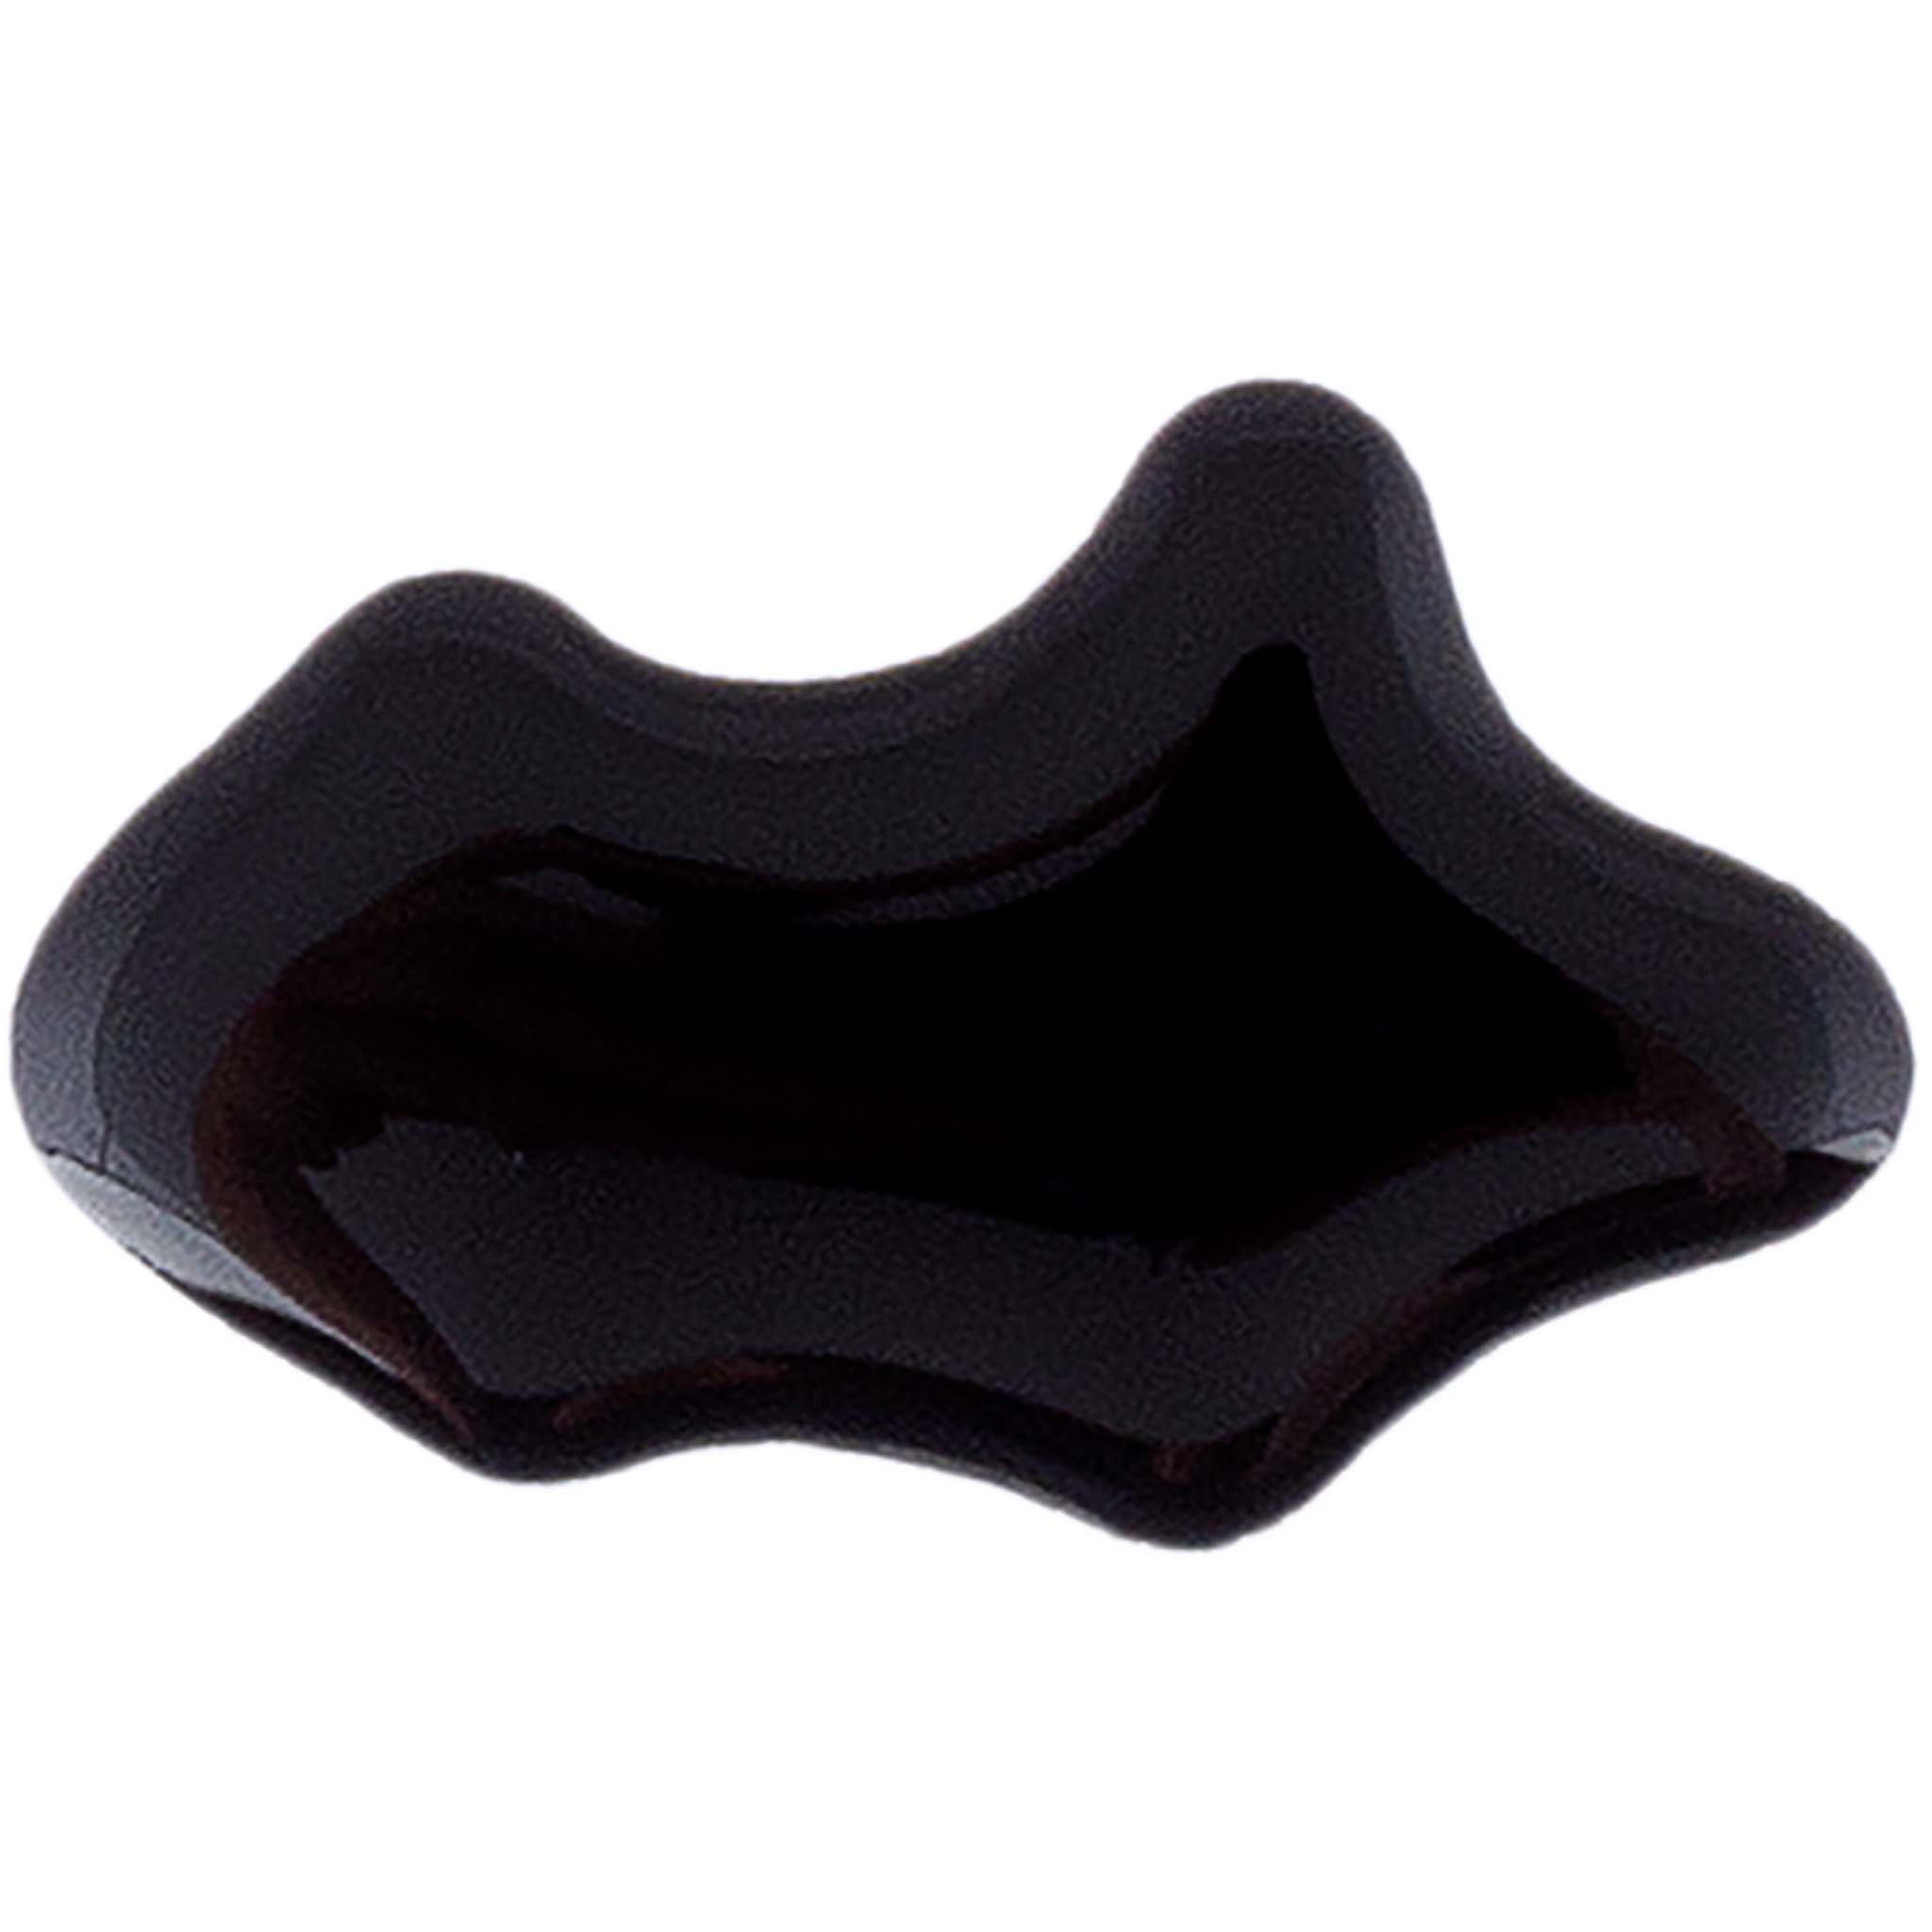 Natural Nail Polish - Licorice - UK DELIVERY ONLY - mypure.co.uk